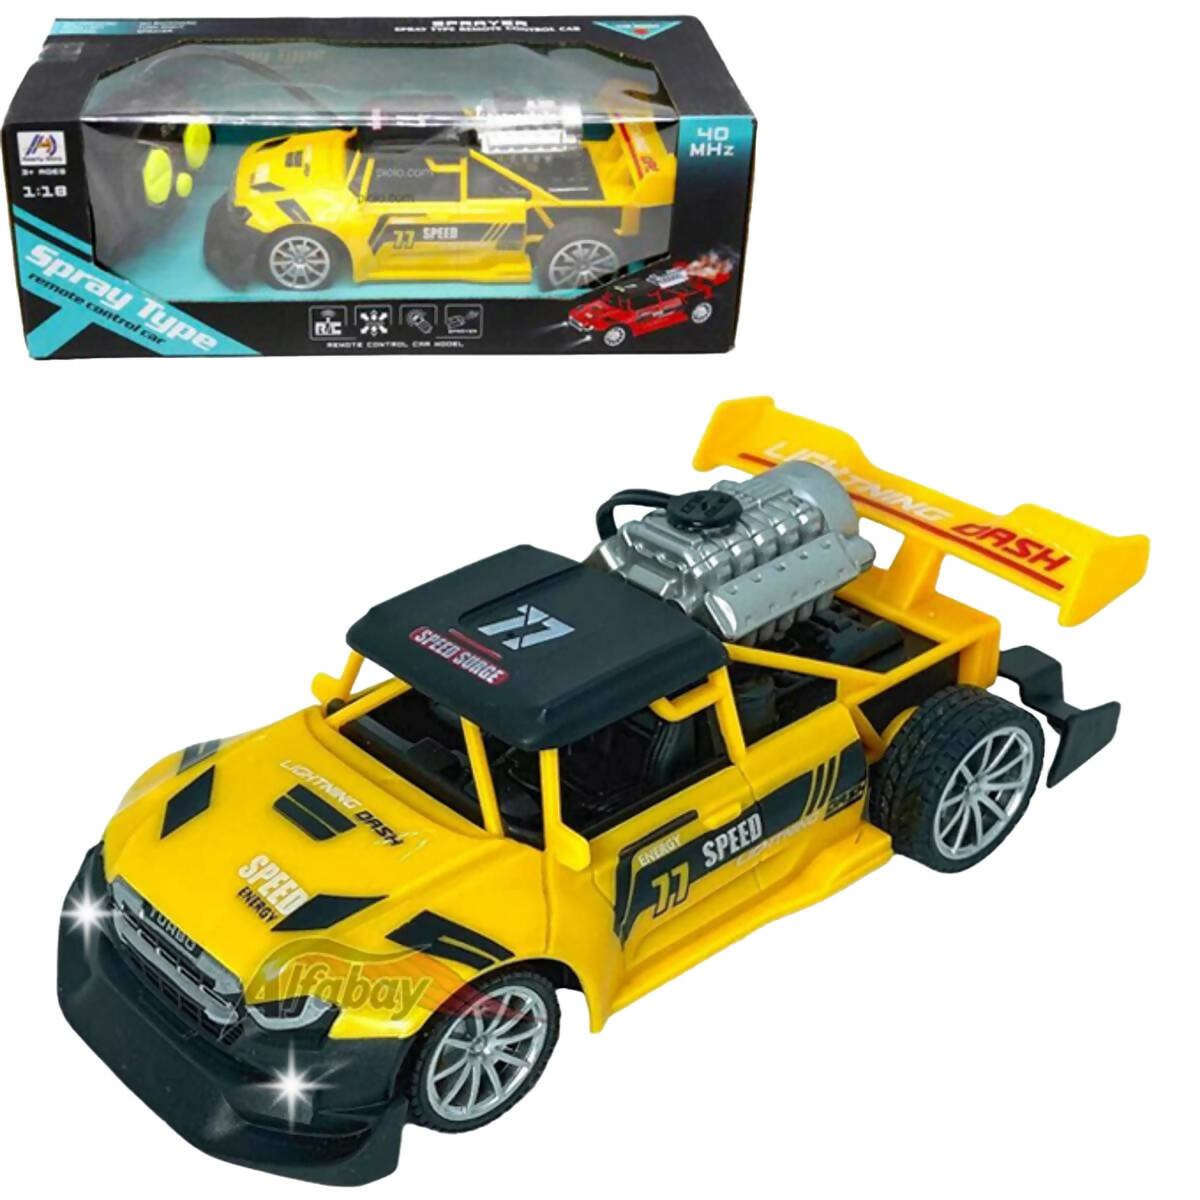 Remote Control Rock Monster Car with Lights & Flame Spray Function Stunt Car - Operated Battery - Yellow